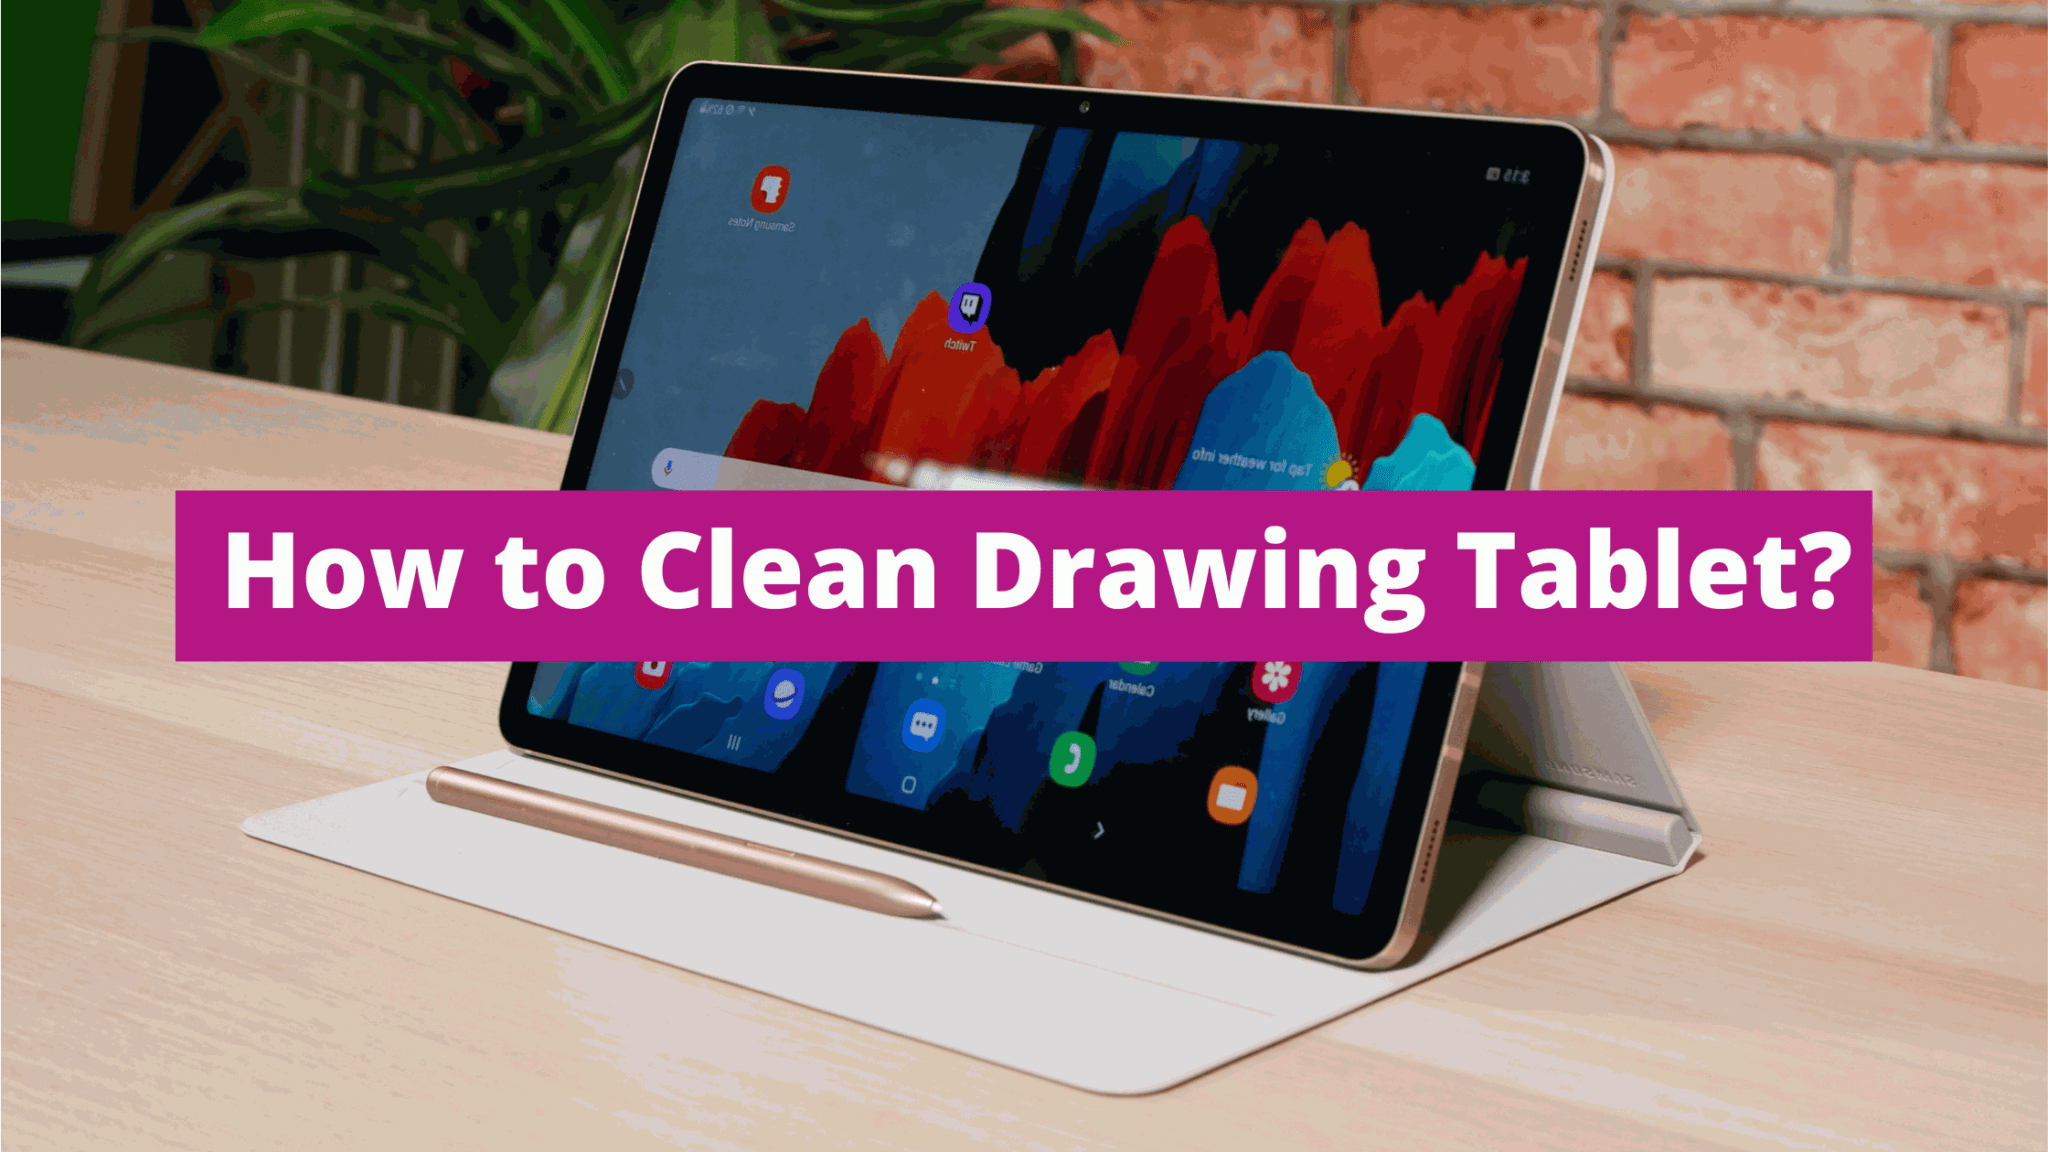 HOW TO CLEAN A DRAWING TABLET